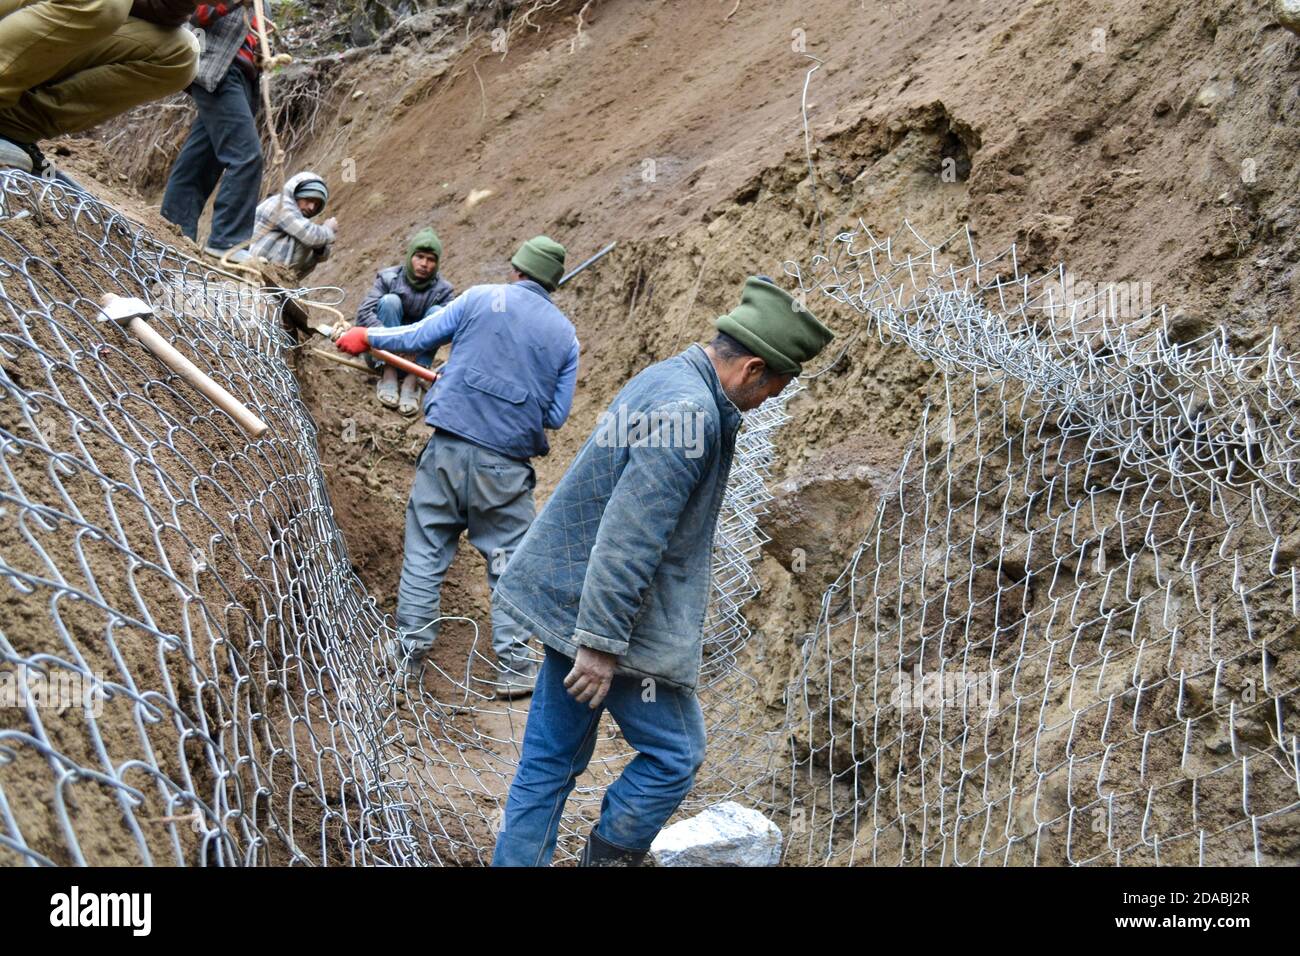 Rudarprayag, Uttarakhand, India, April 26 2014, Labor working for Kedarnath reconstruction after disaster. Portions of the Himalayan shrine in Uttarakhand were damaged in flash floods in 2013, after which the reconstruction work start.  Stock Photo